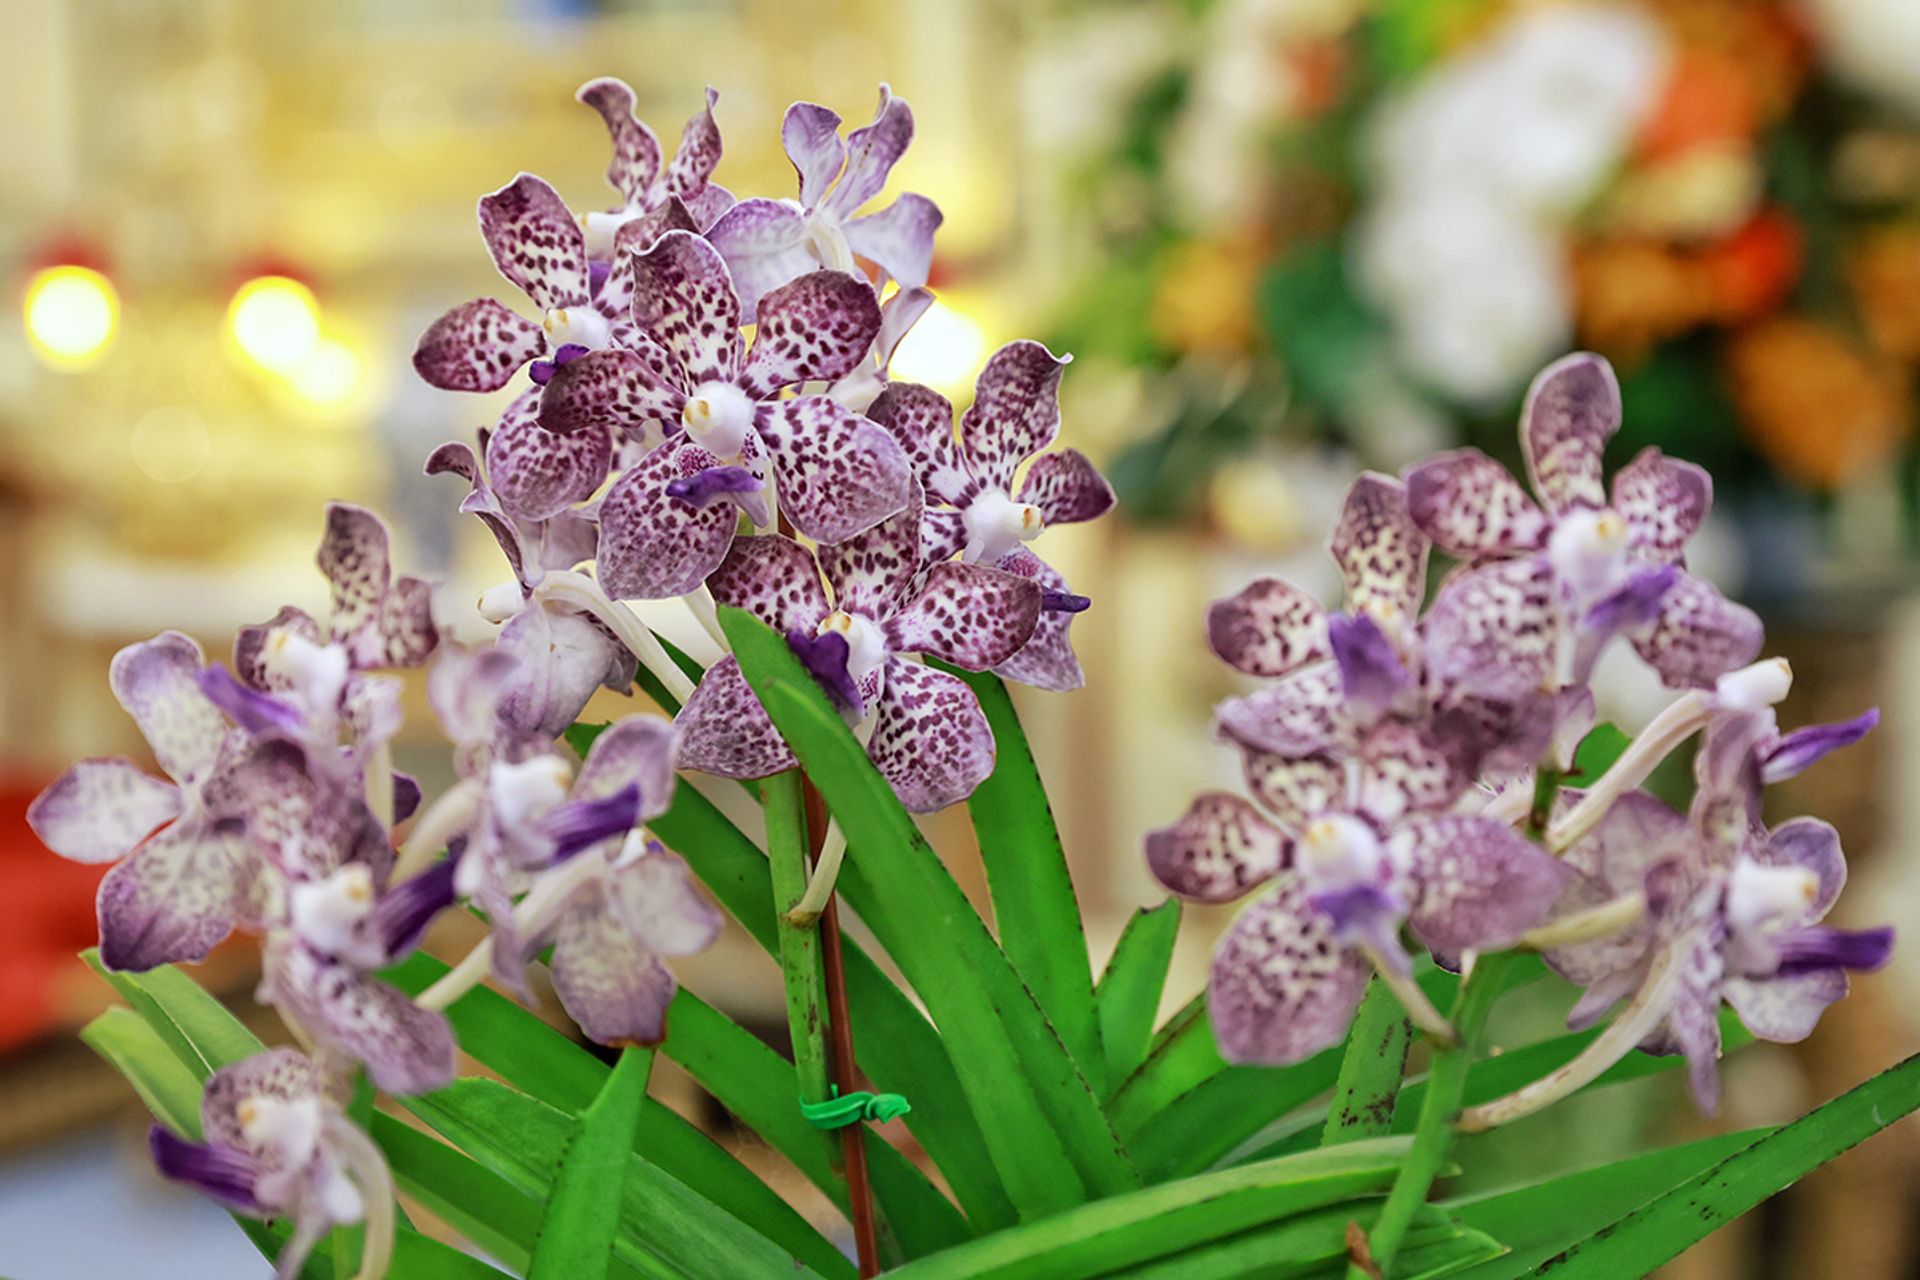 The hybrid orchid is called the Vanda Halimah Yacob Mohamed, which is a cross between the Vanda Kulwadee Fragrance and the Vanda tesselata. Each stalk of between 19cm and 24cm bears nine to 10 flowers with white petals, bright violet-blue lips, and purple spots. ST PHOTO: KEVIN LIM